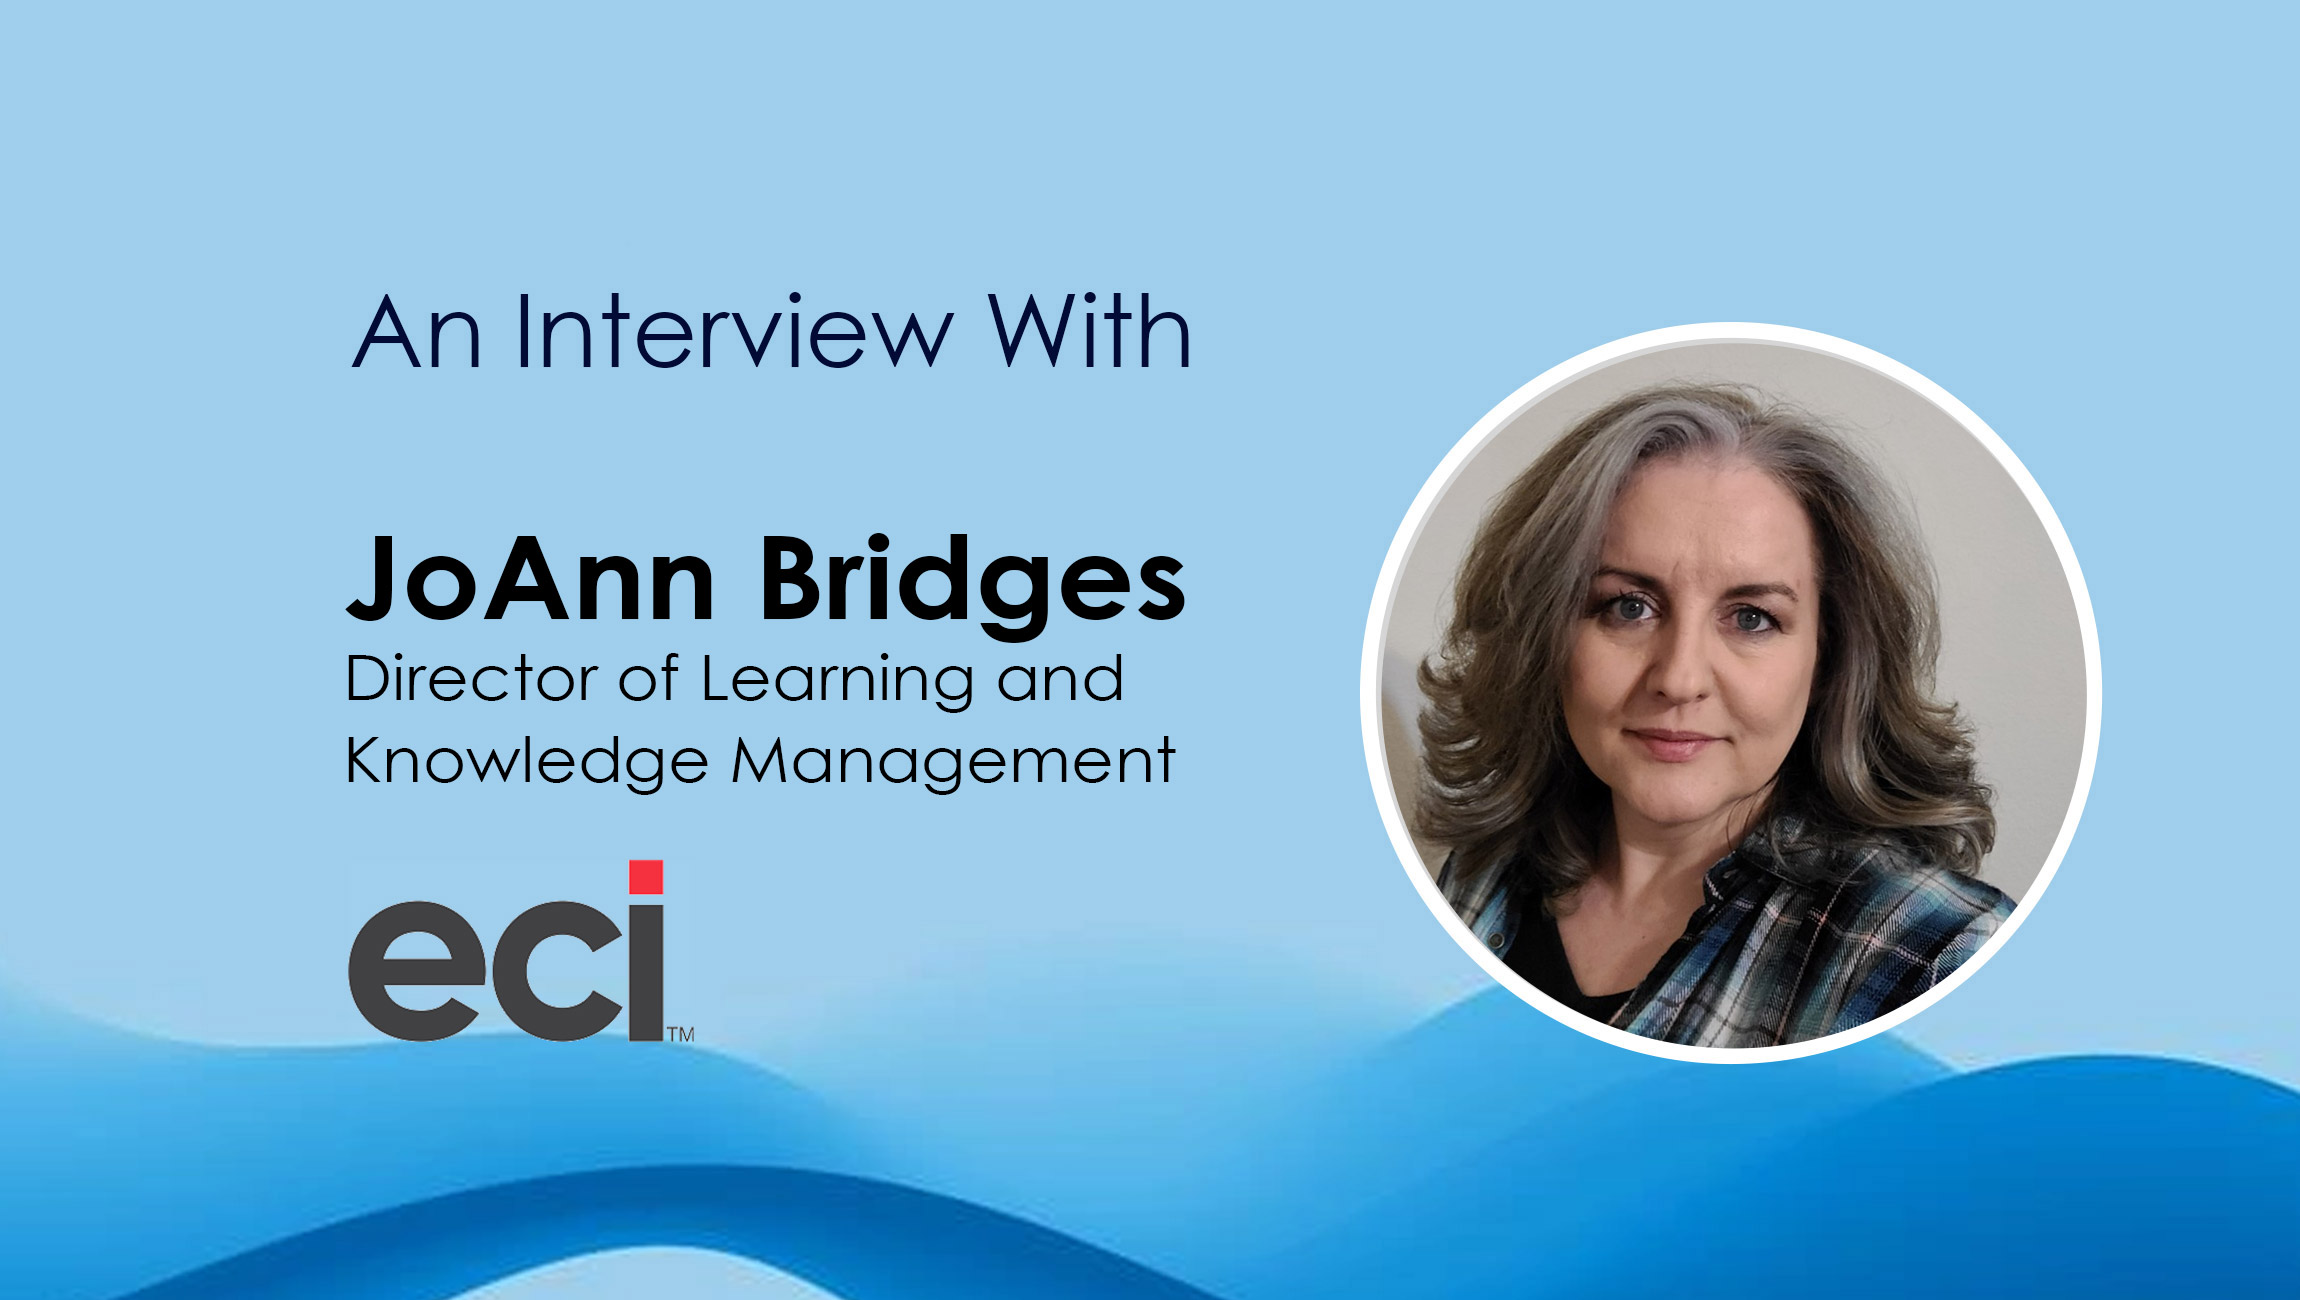 SalesTechStar Interview with JoAnn Bridges, Director of Learning and Knowledge Management at ECI Software Solutions